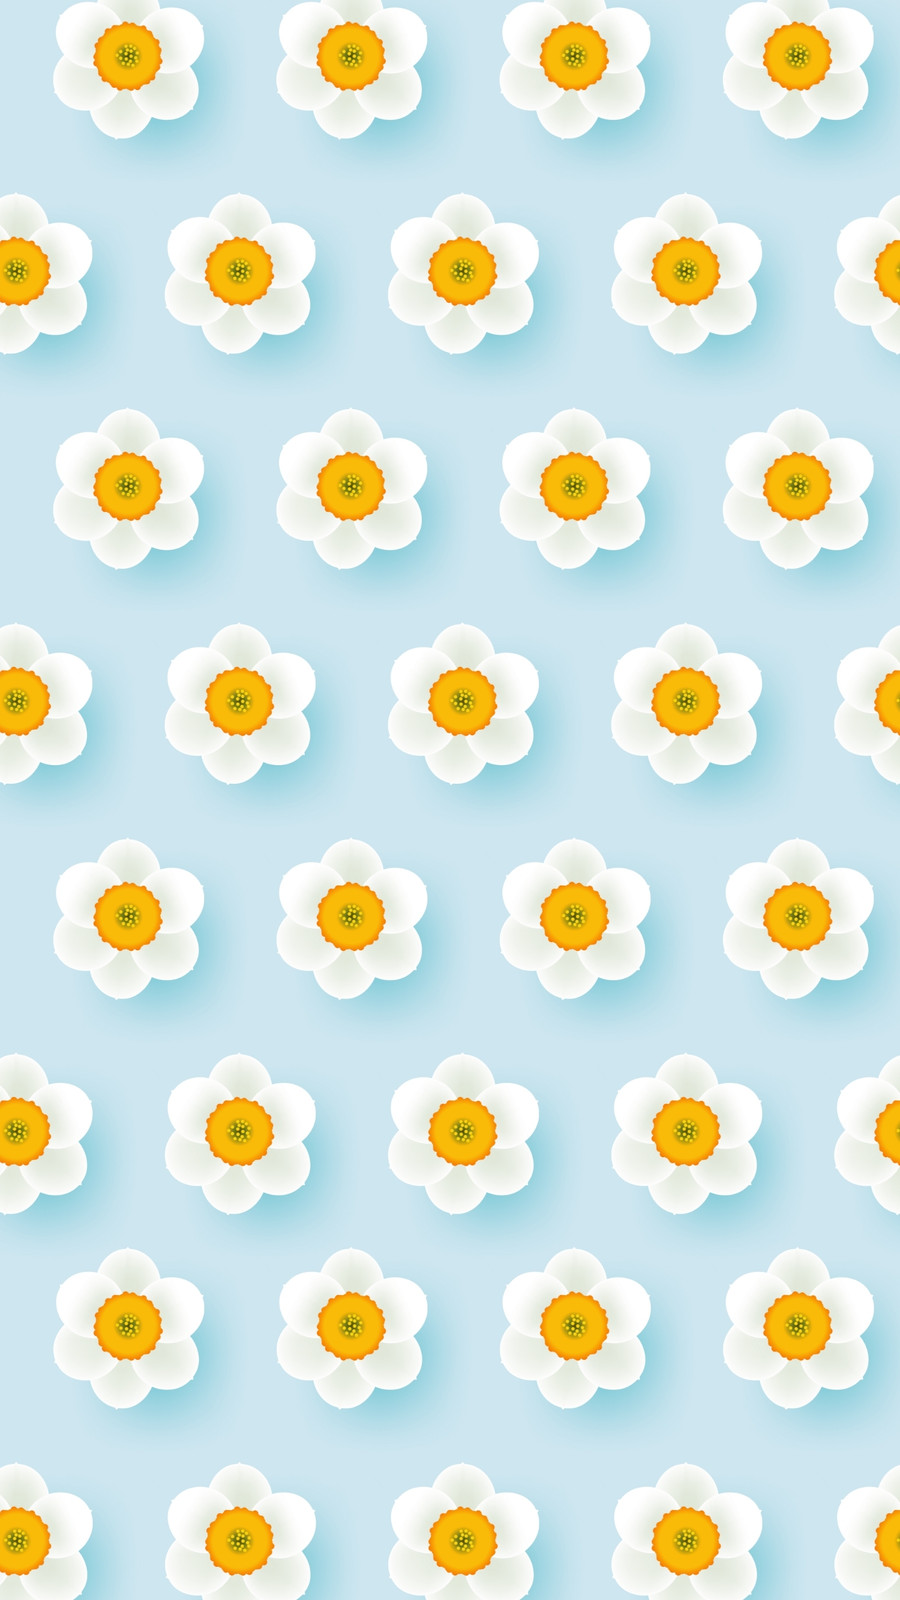 Customize 432+ Spring Aesthetic Phone Wallpaper Templates Online - Canva